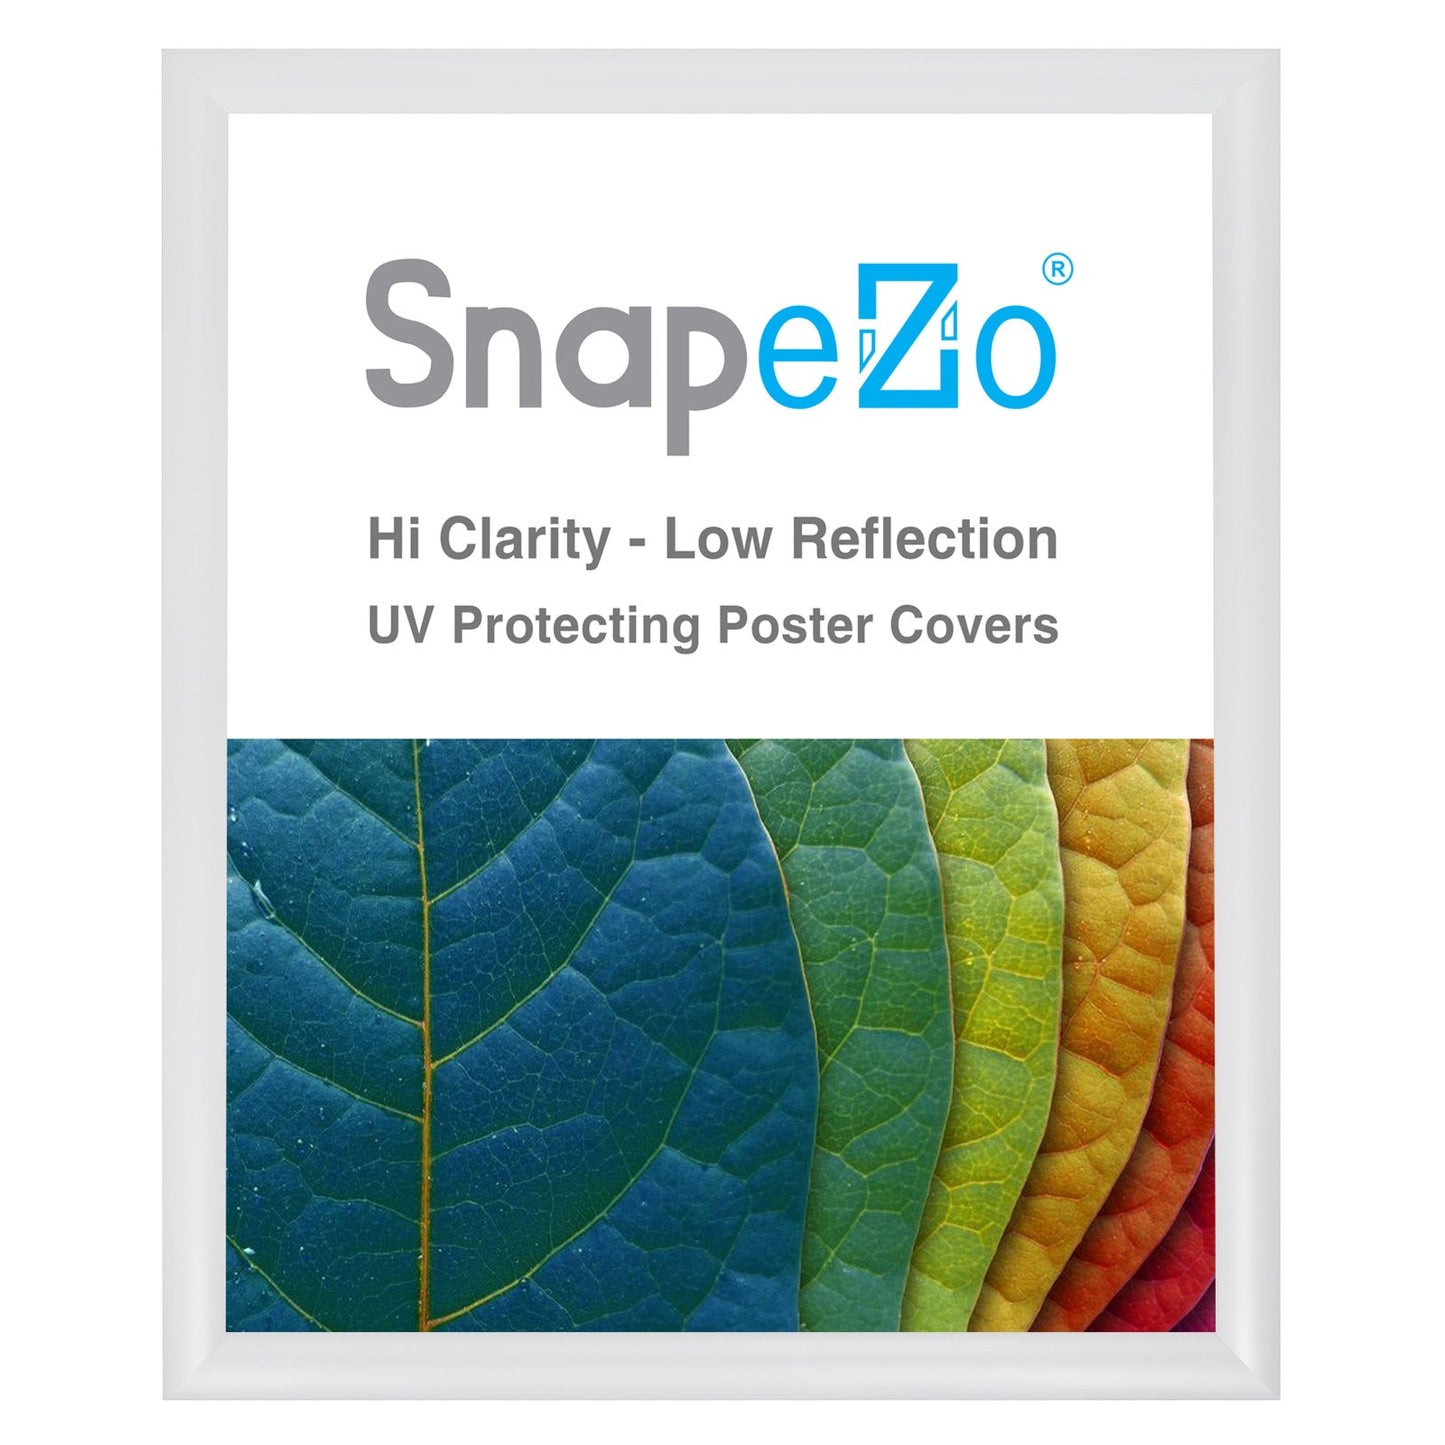 Load image into Gallery viewer, 18x22 White SnapeZo® Snap Frame - 1.2&amp;quot; Profile
